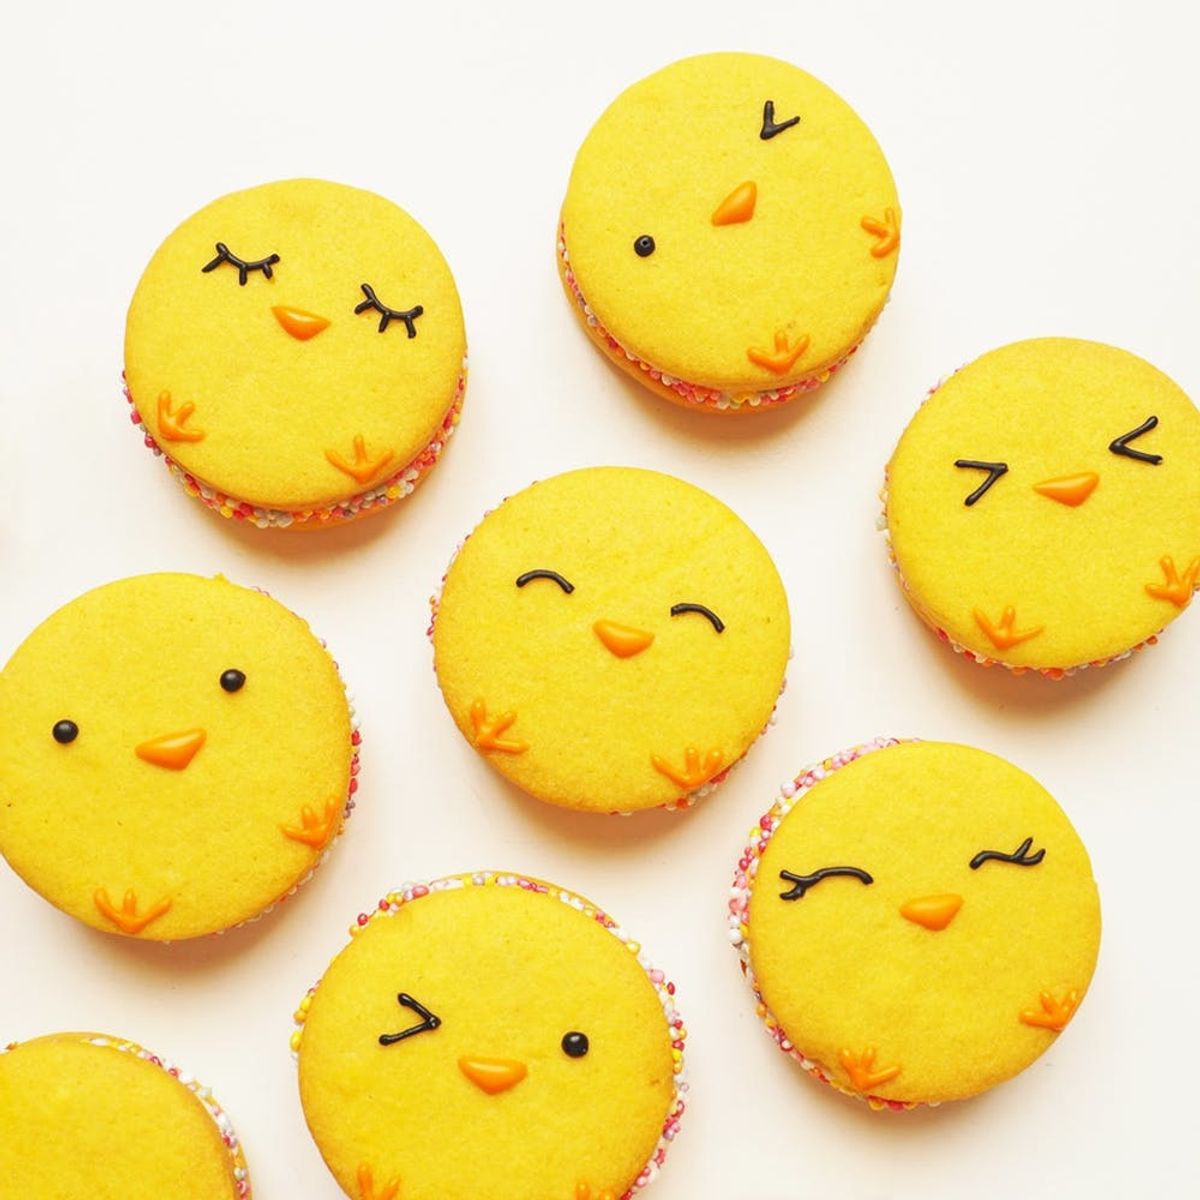 Cute Chick Sandwich Cookies Recipe Just in Time for Easter